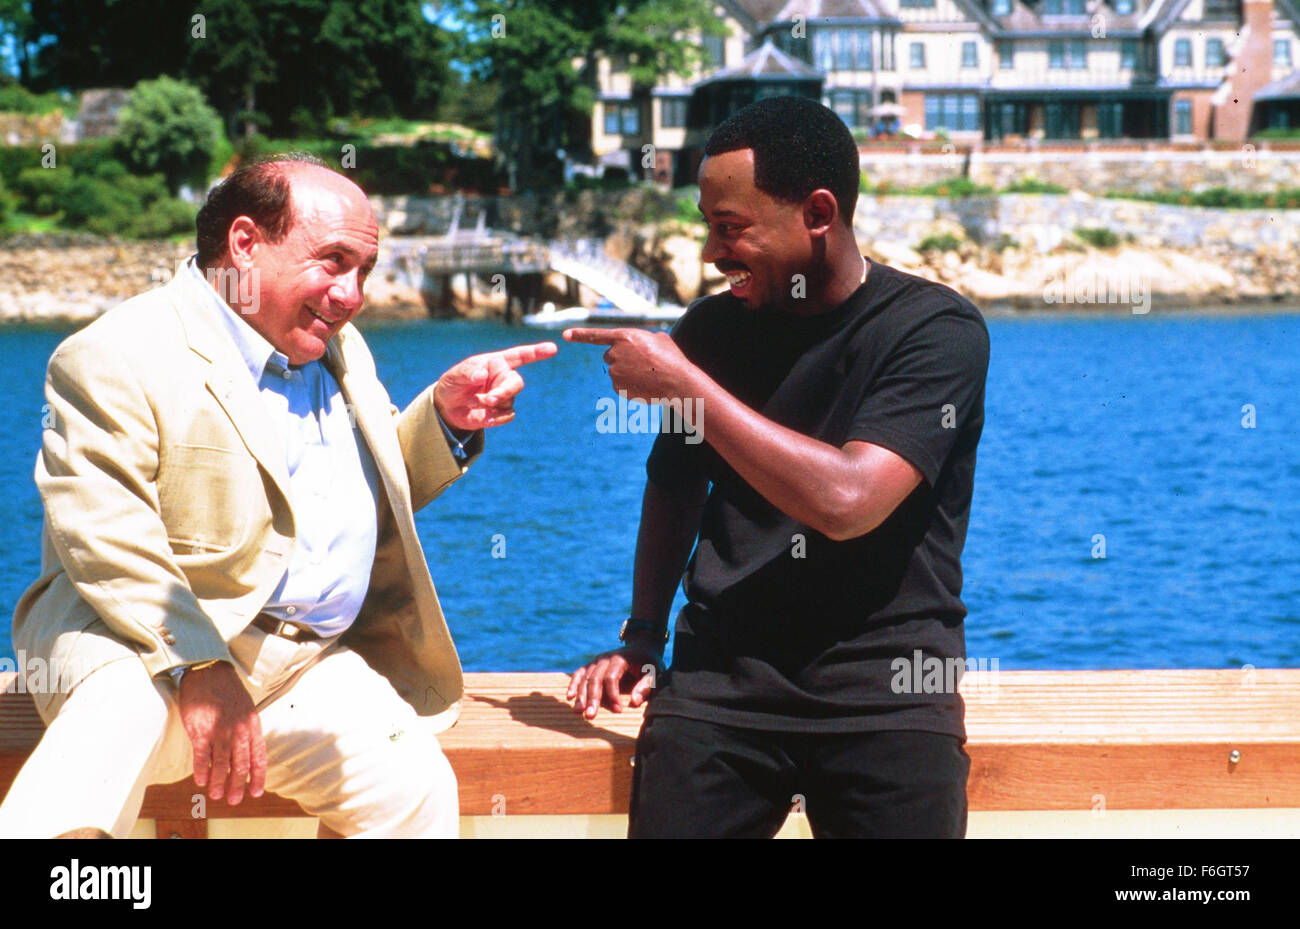 Jun 01, 2001; Boston , MA, USA; Actors MARTIN LAWRENCE as Kevin Caffery and DANNY DE VITO stars as Max Fairbanks in 'What's the Worst That Could Happen.' Stock Photo